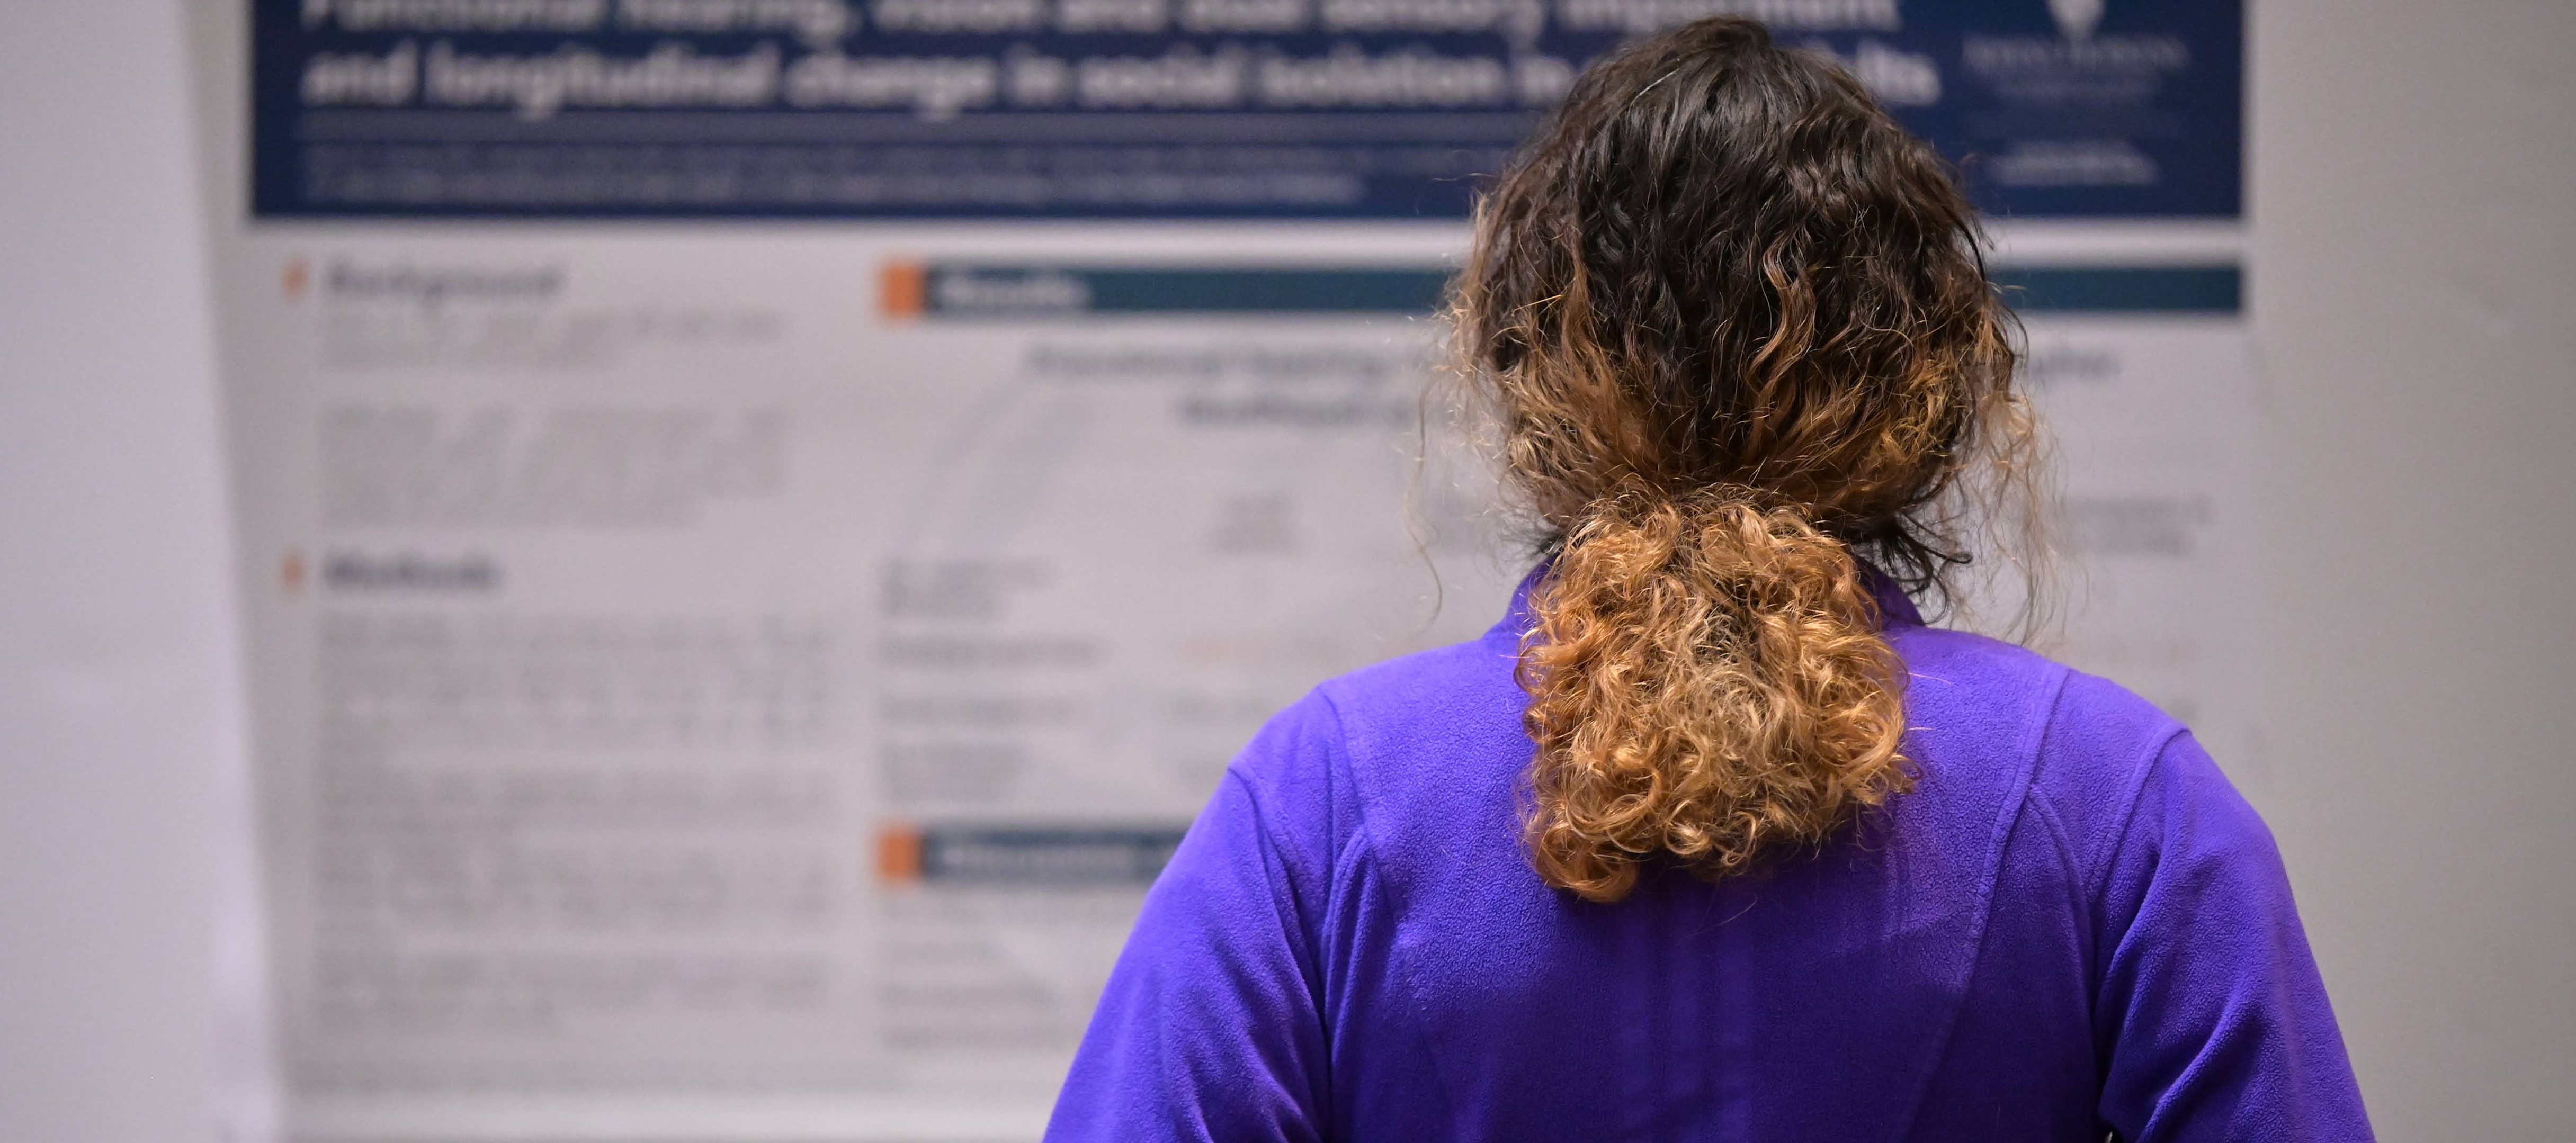 The back of clinician in a purple fleece, reading a research poster